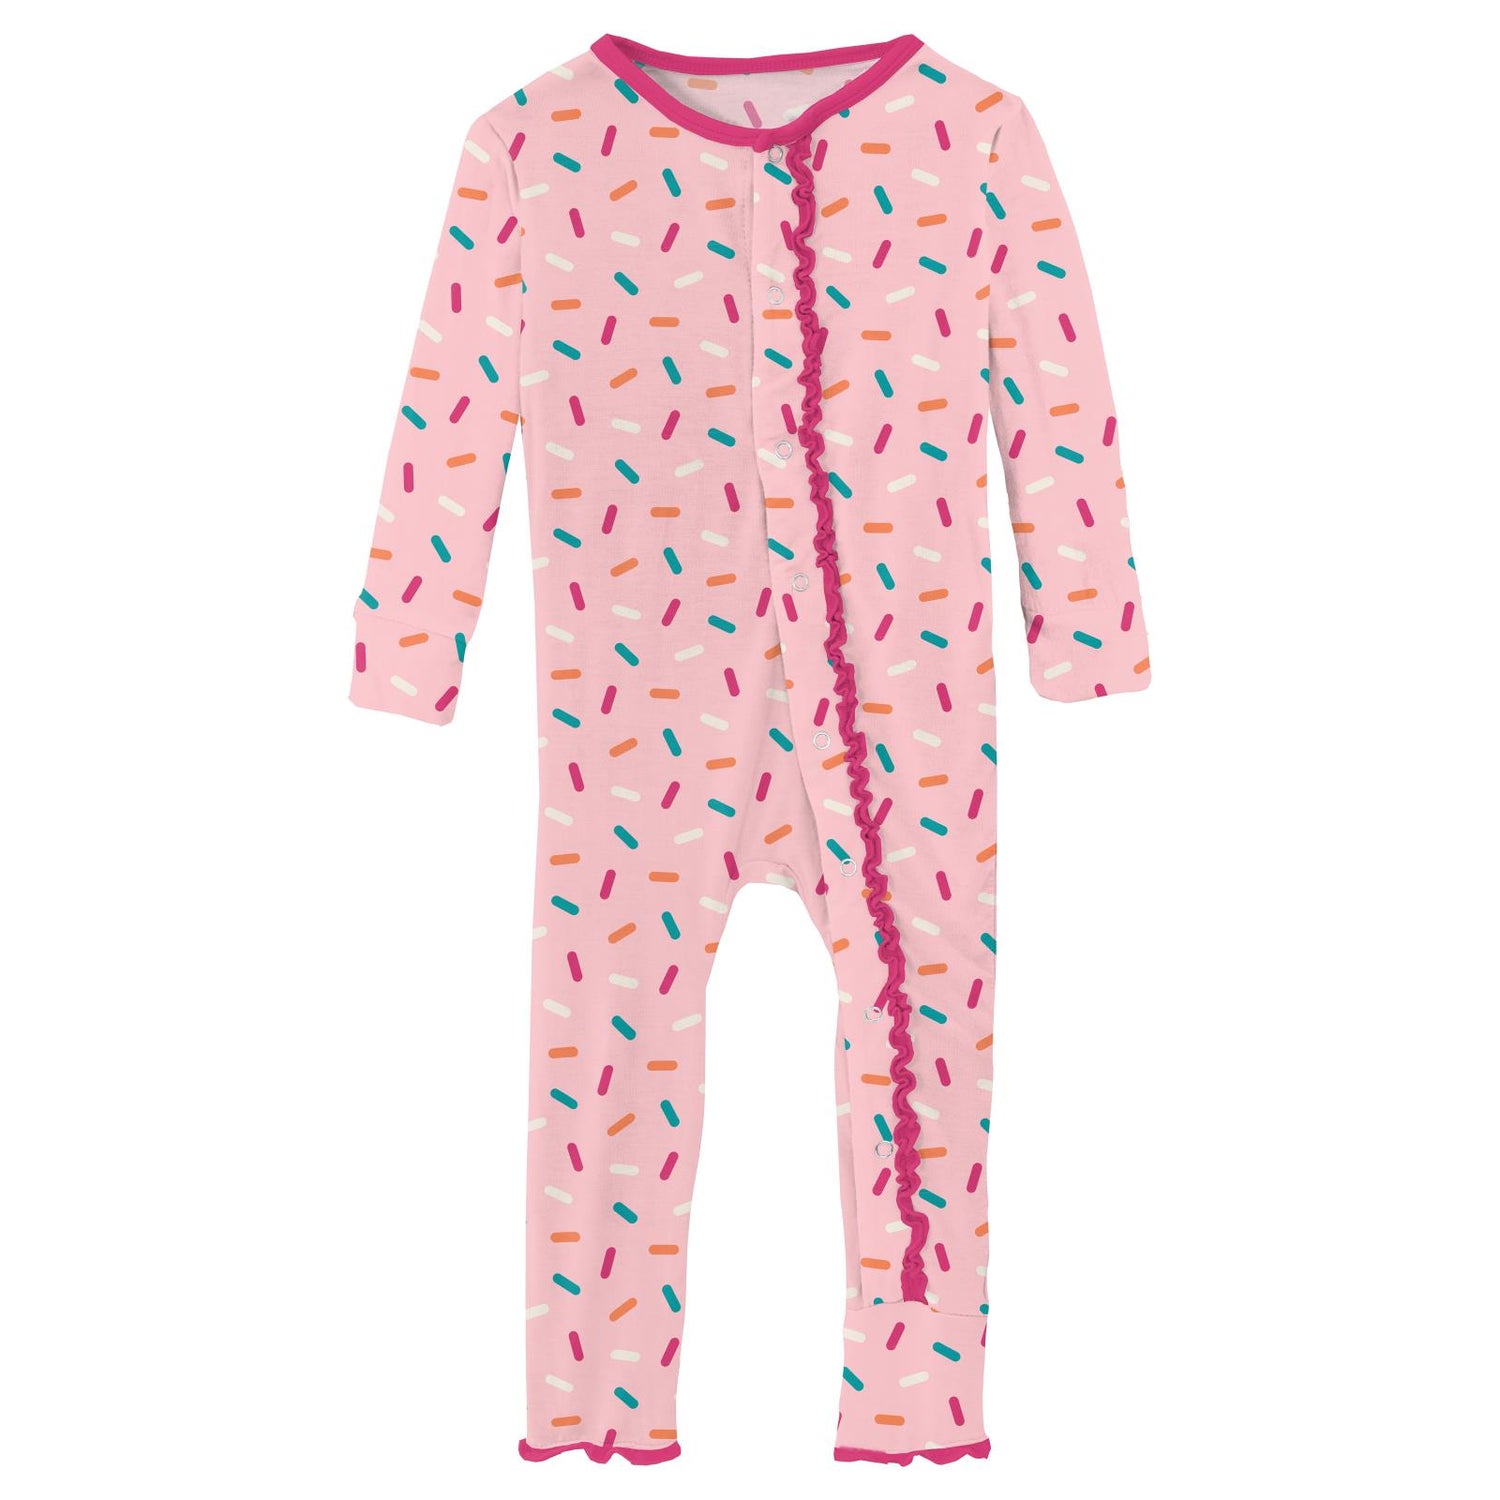 Print Muffin Ruffle Coverall with Snaps in Lotus Sprinkles